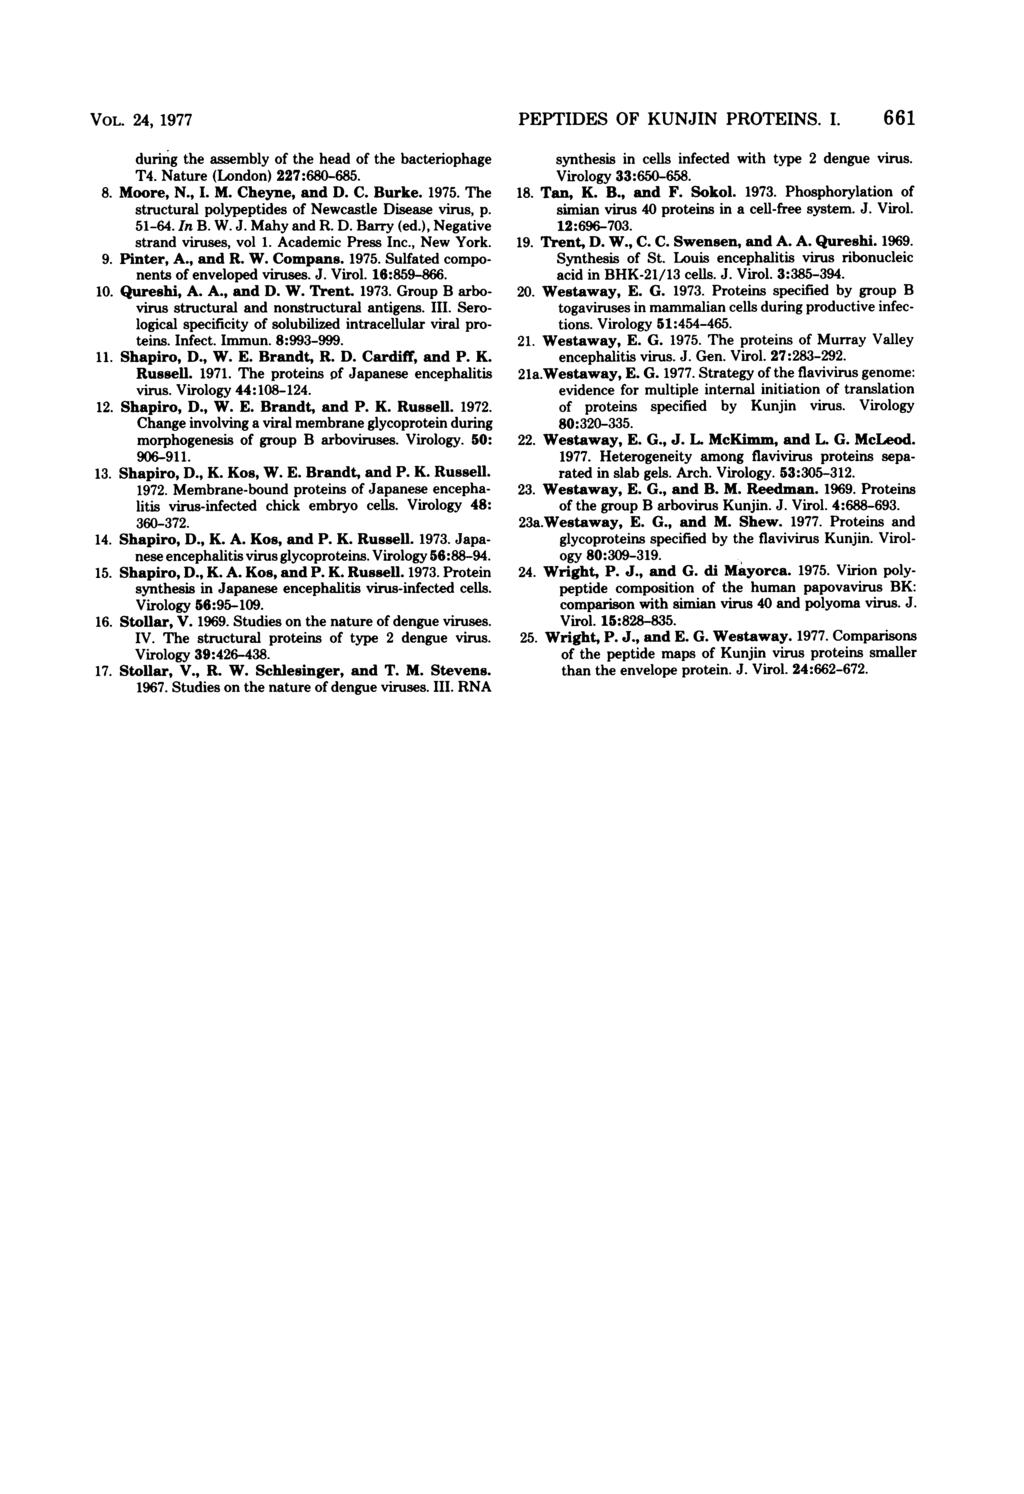 VOL. 24, 1977 during the assembly of the head of the bacteriophage T4. Nature (London) 227:68-685. 8. Moore, N., I. M. Cheyne, and D. C. Burke. 1975.